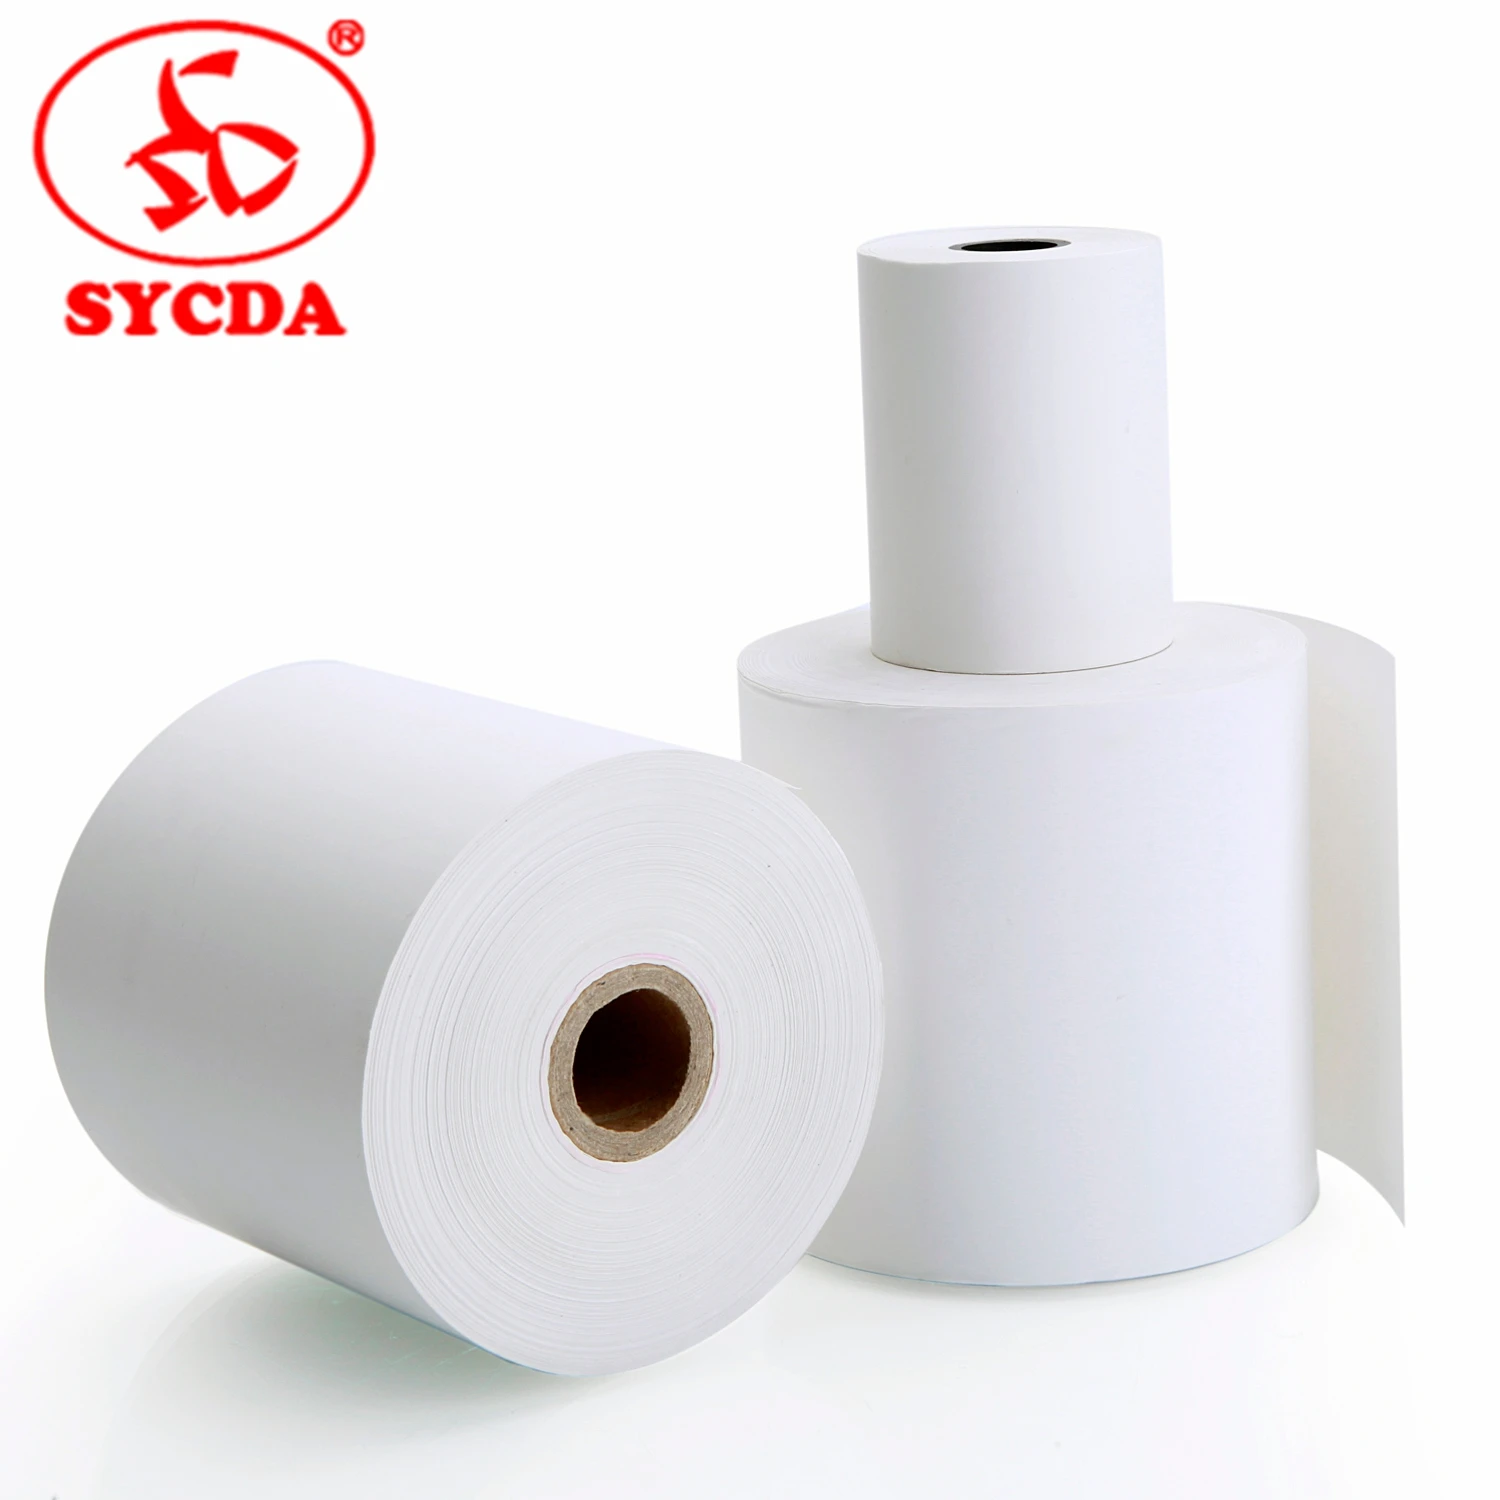 Thermal paper rolls atm paper  lottery ticket